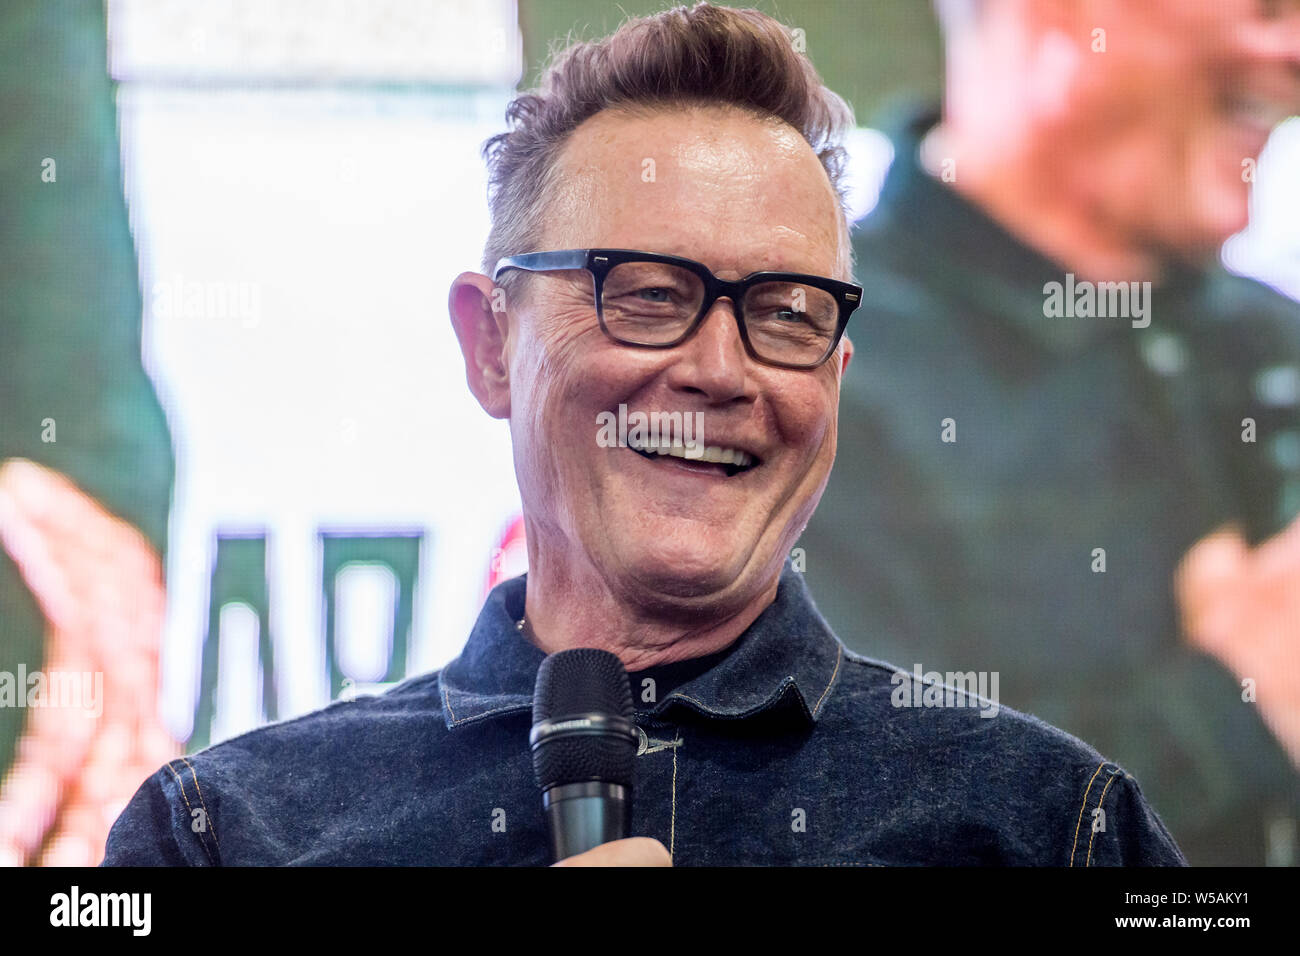 LONDON - JULY 27, 2019: American actor Robert Patrick (Terminator 2, X-Files) talks to the audience during the London Film & Comic Con 2019 at the Olympia Exhibition Center, Hammersmith. Editorial use only Stock Photo